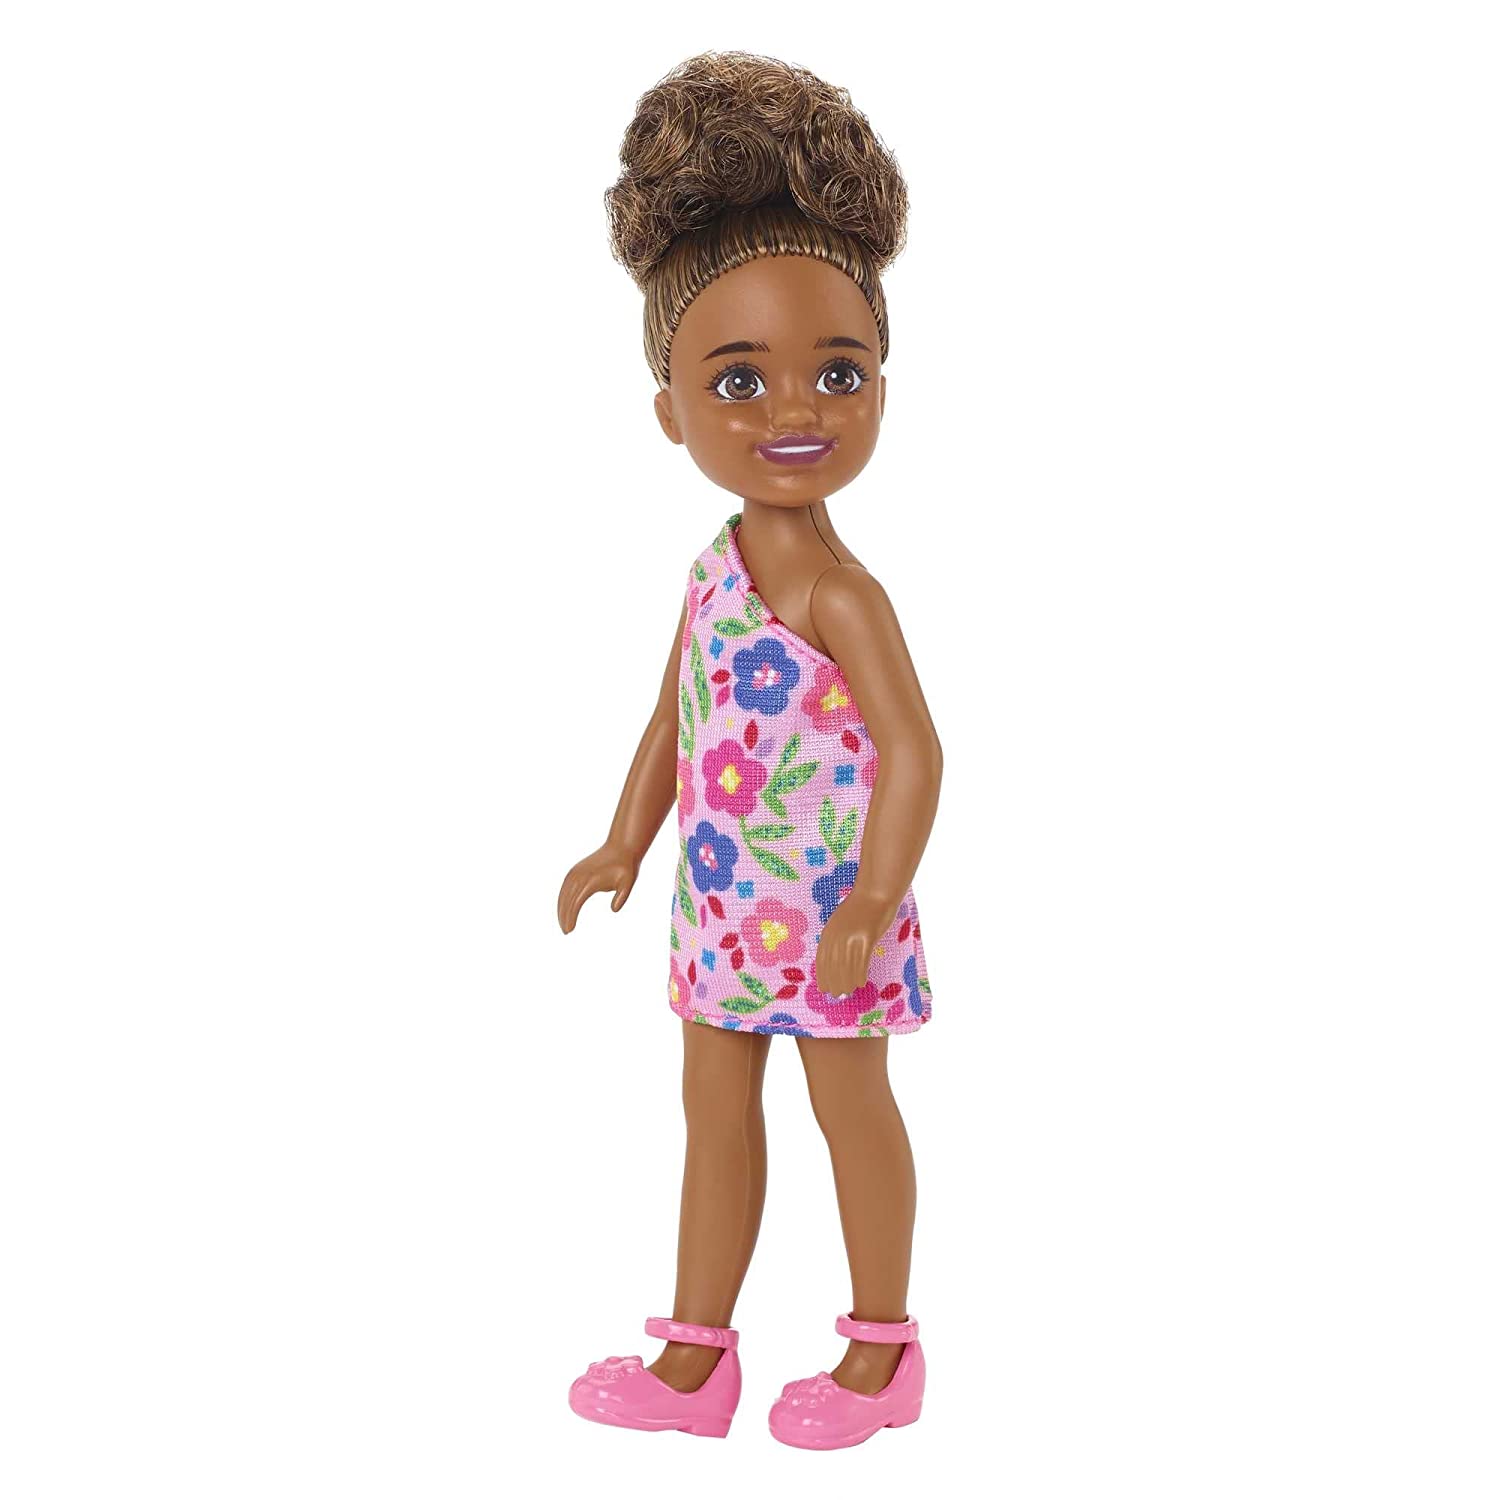 Barbie Chelsea 6 Inch Doll Brunette Curly Hair Wearing One-Shoulder Flower-Print Dress and Pink Shoes for Kids Ages 3 Years Old & Up